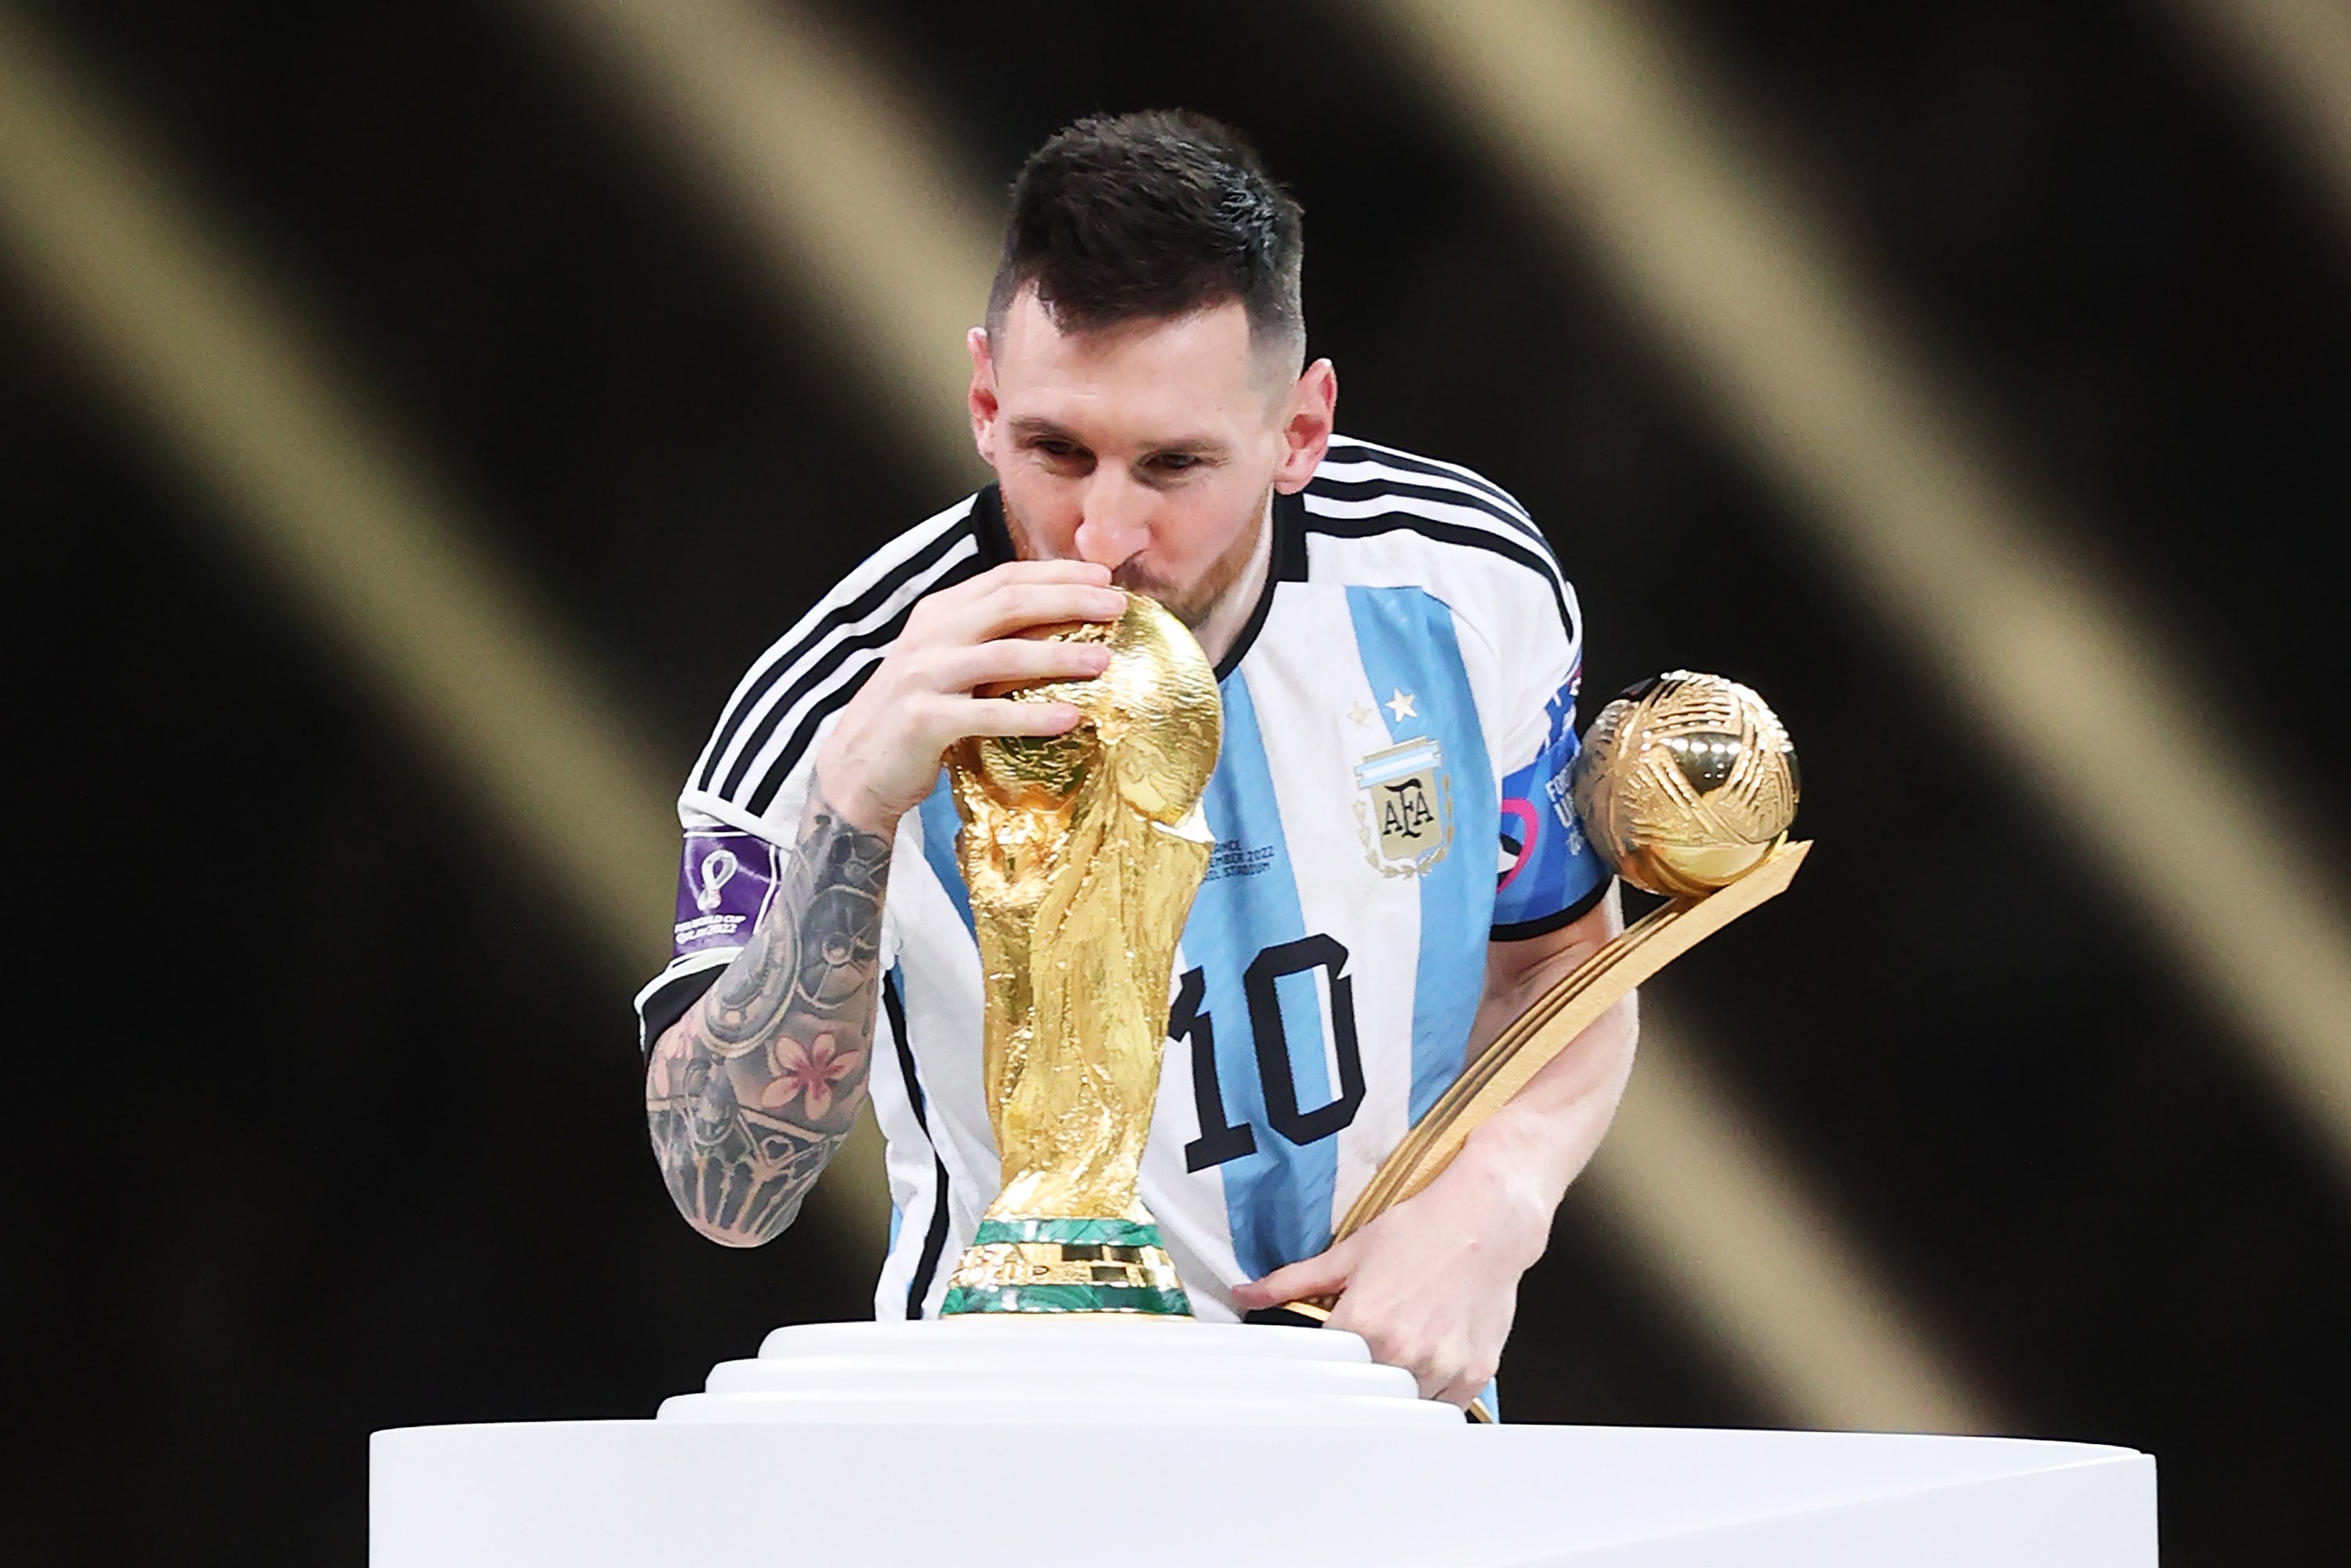 Lionel Messi has won both Copa America and the World Cup with Argentina